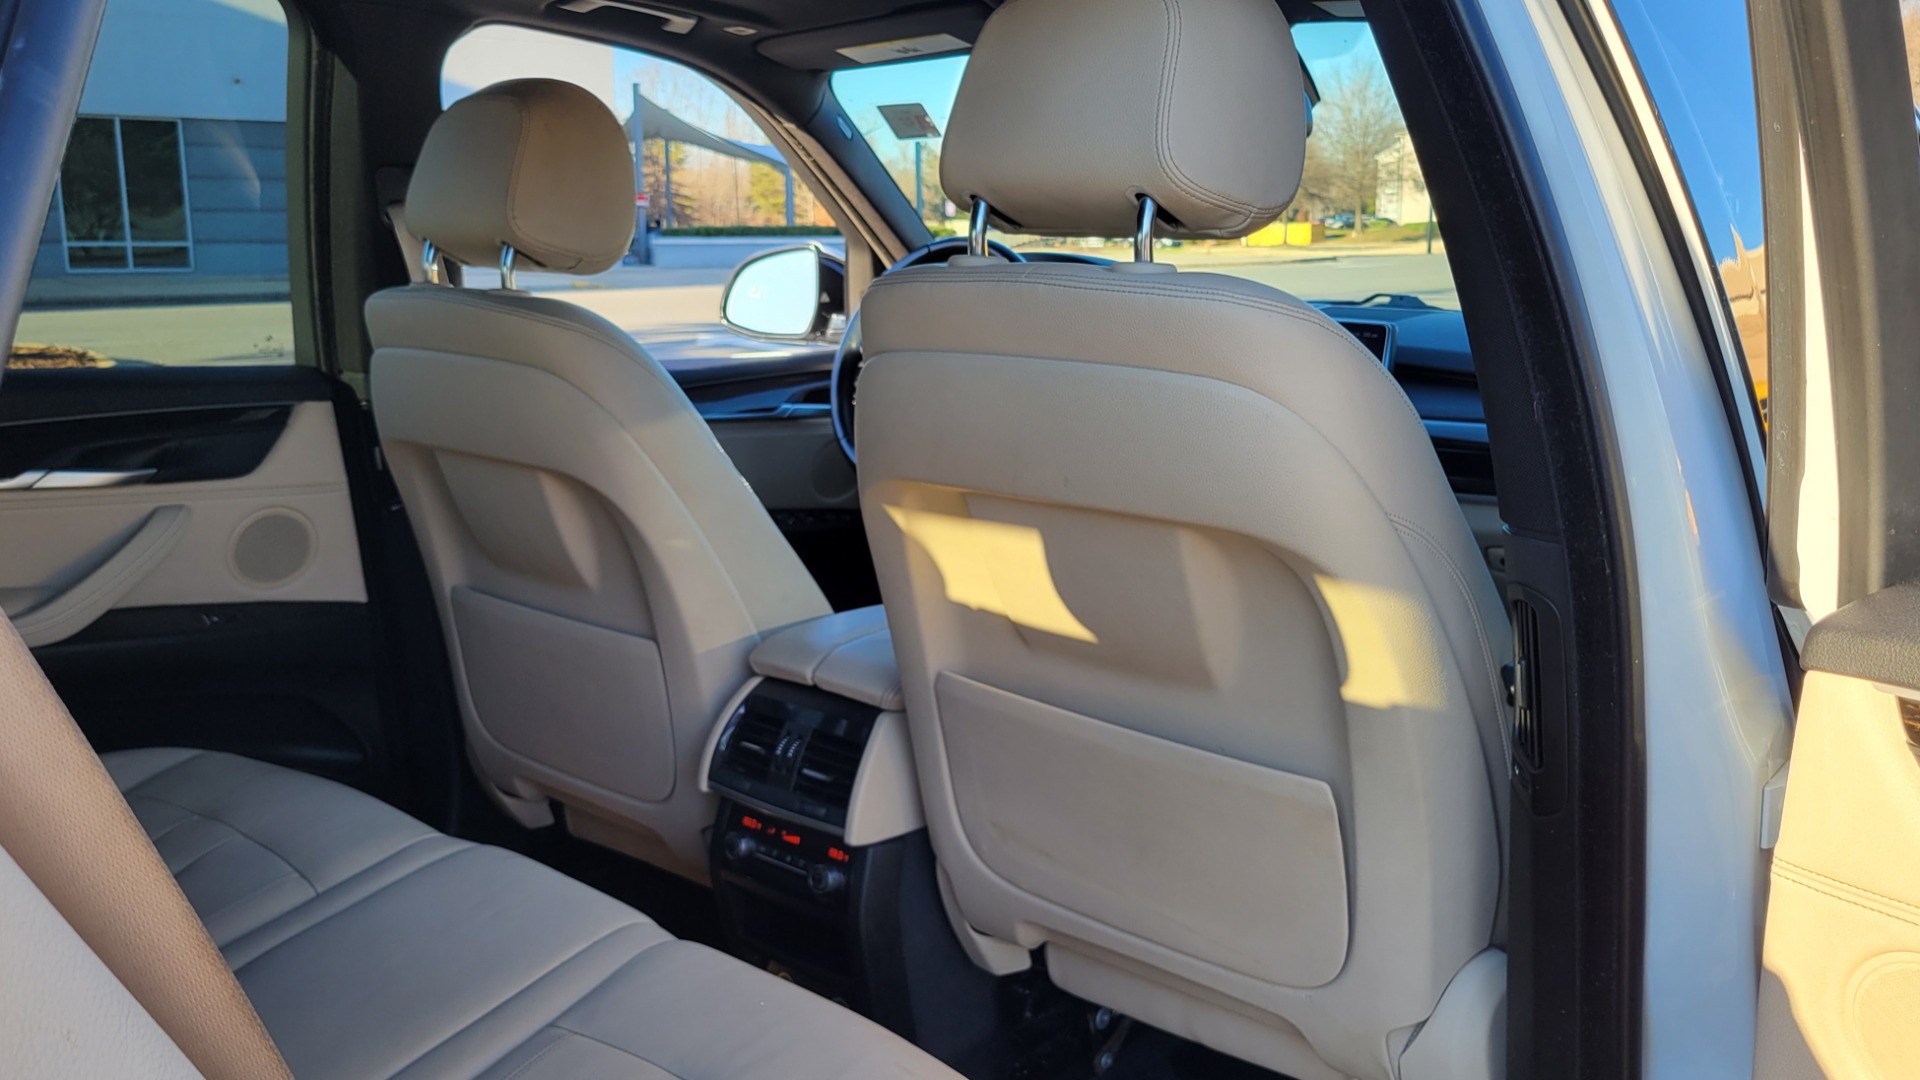 Used 2018 BMW X5 XDRIVE35I PREMIUM / DRVR ASST / HUD / WIRELESS CHARGING / HEATED SEATS for sale $41,995 at Formula Imports in Charlotte NC 28227 73